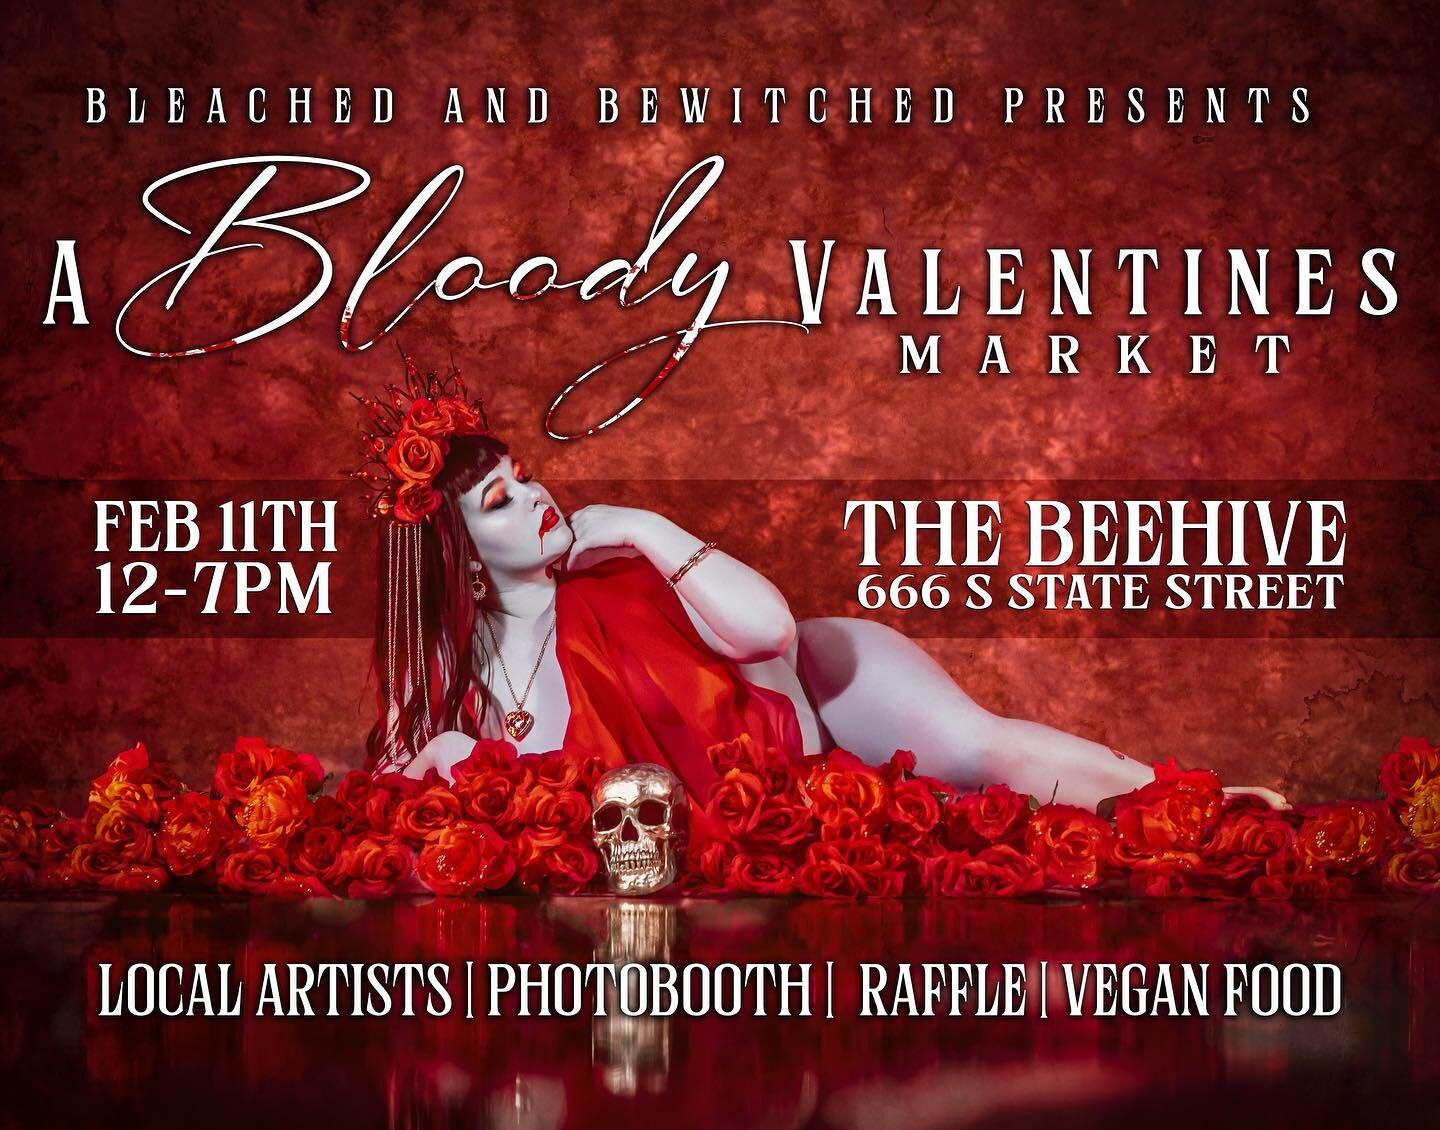 A market you don&rsquo;t want to miss. 💔
Come get some goodies from myself and all of the other amazing local vendors!
FEB. 11th from 12pm-7pm at the @beehiveslc 
&hellip;
#nikkitanouveau #bleachedandbewitched #artist #localartist #slcartist #thebee